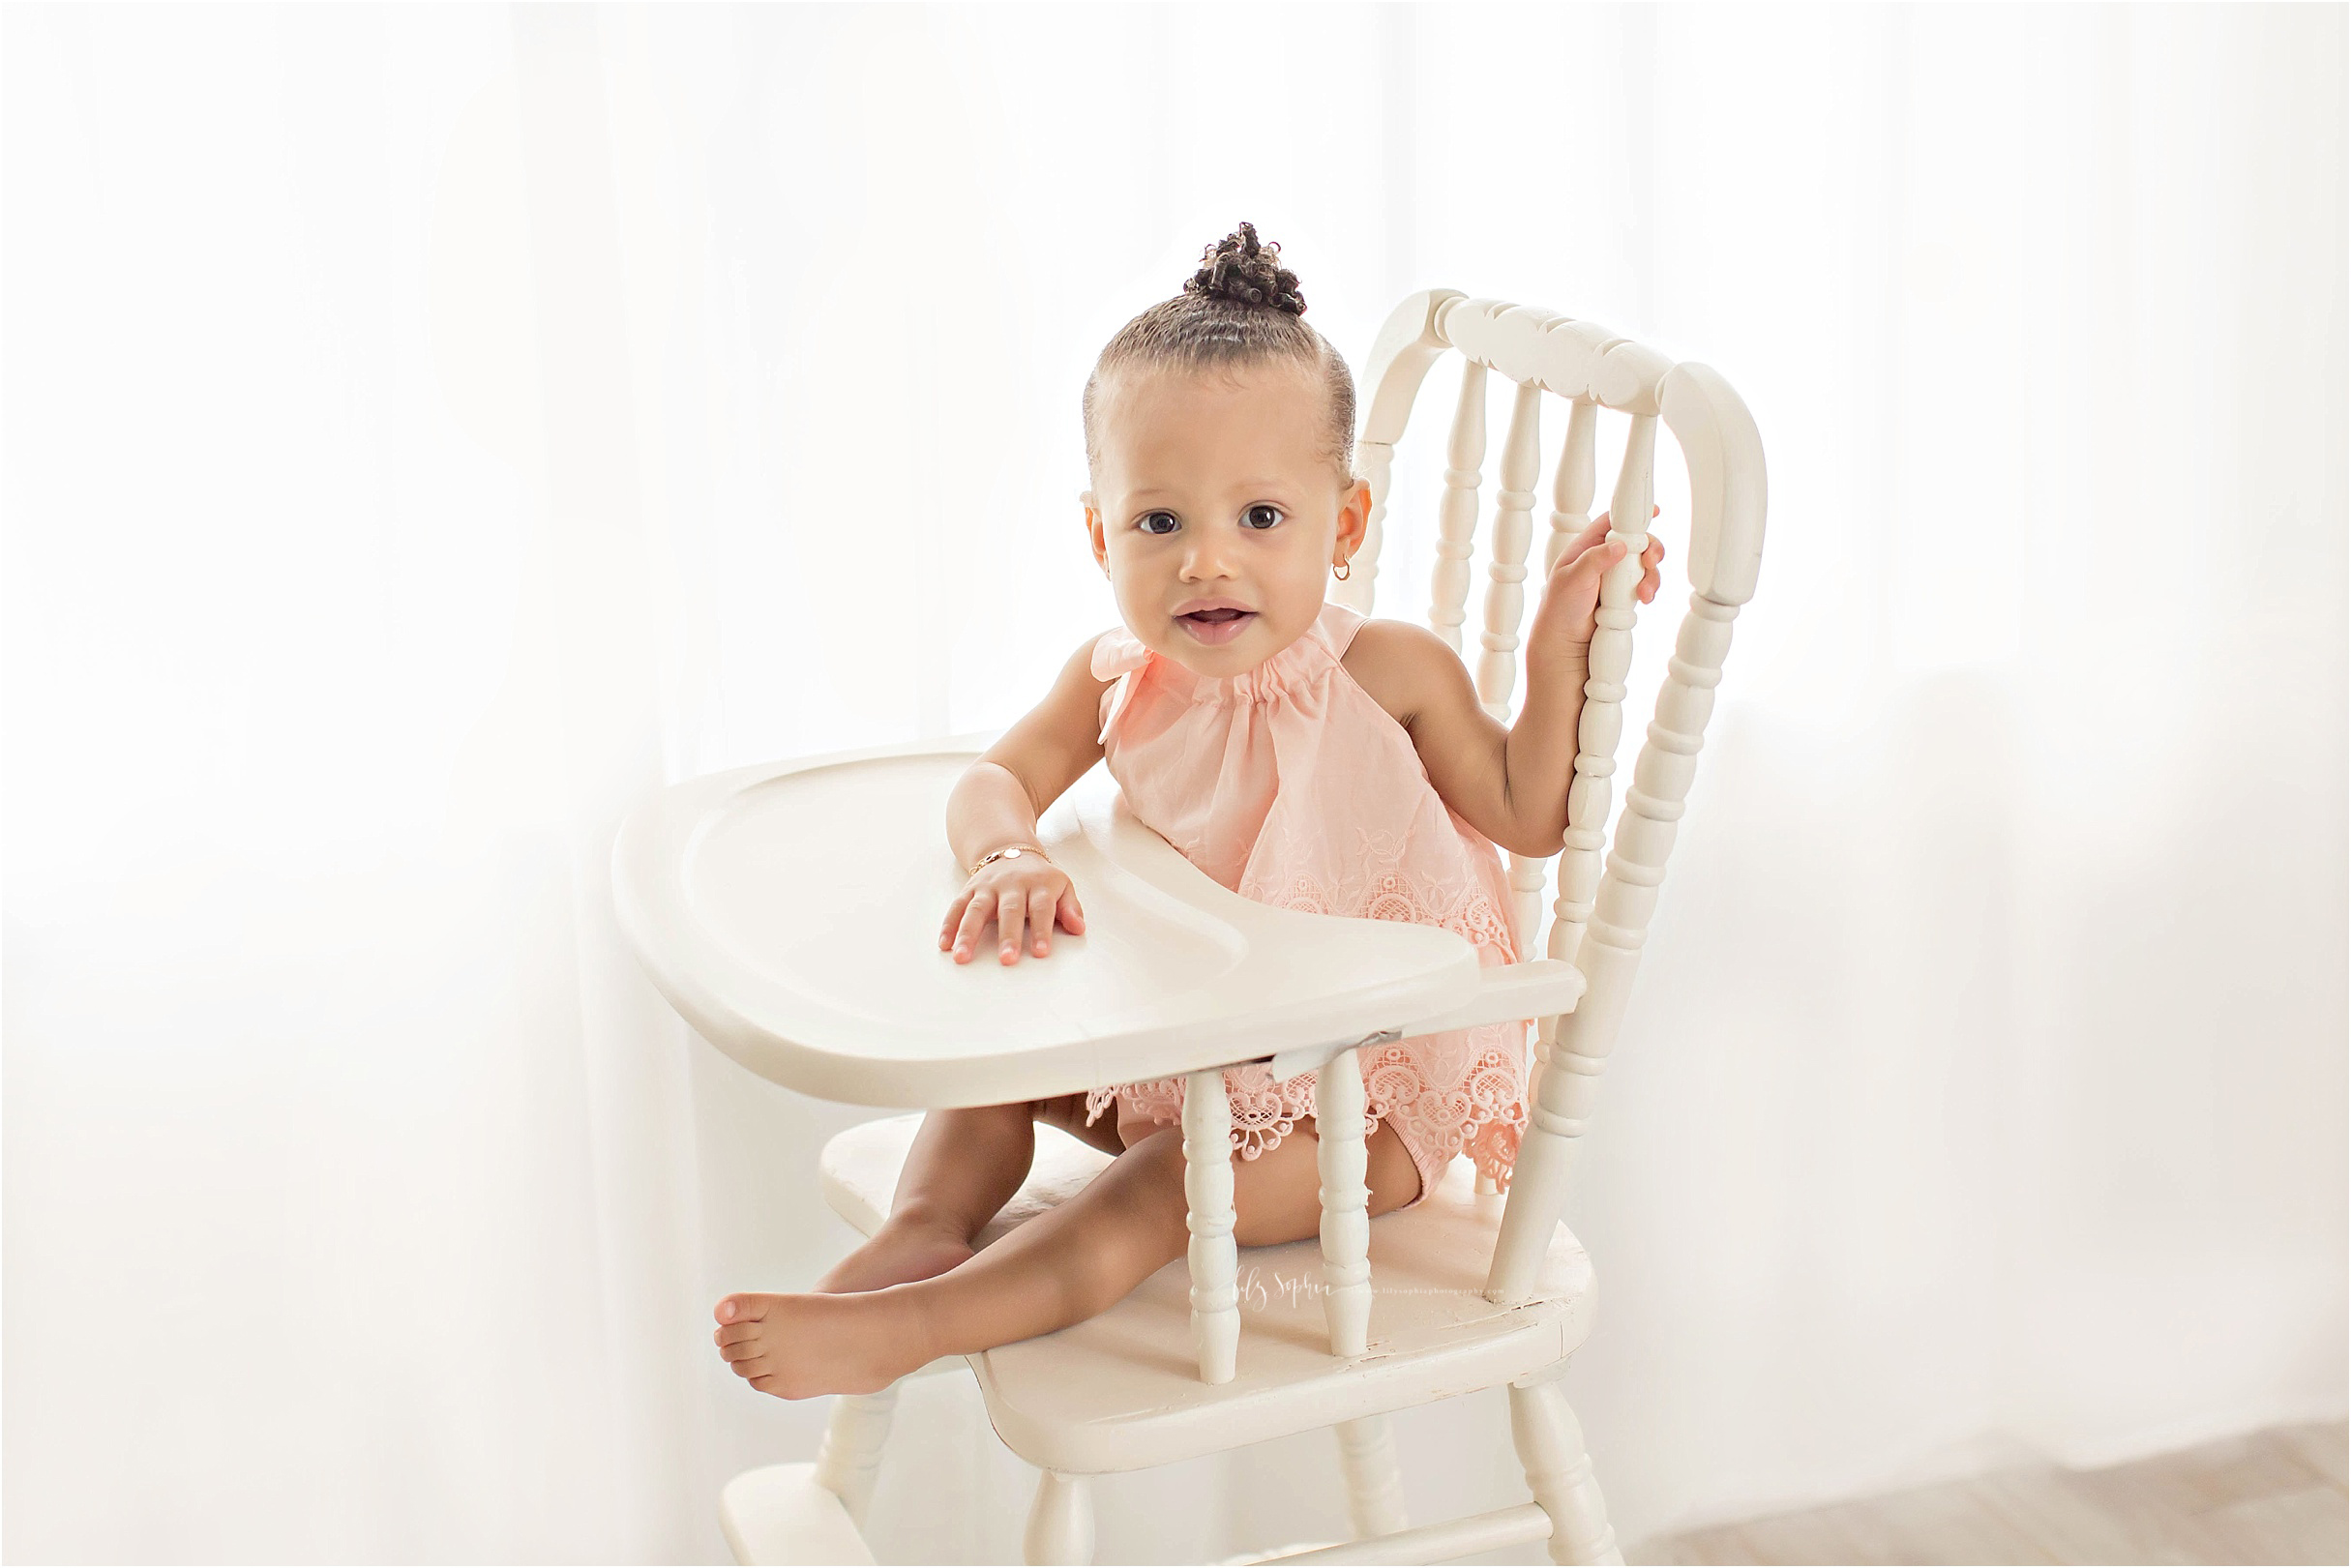  Image of an African American baby girl, with a bun in her hair, wearing a peach dress and sitting in an antique wooden highchair.&nbsp; 